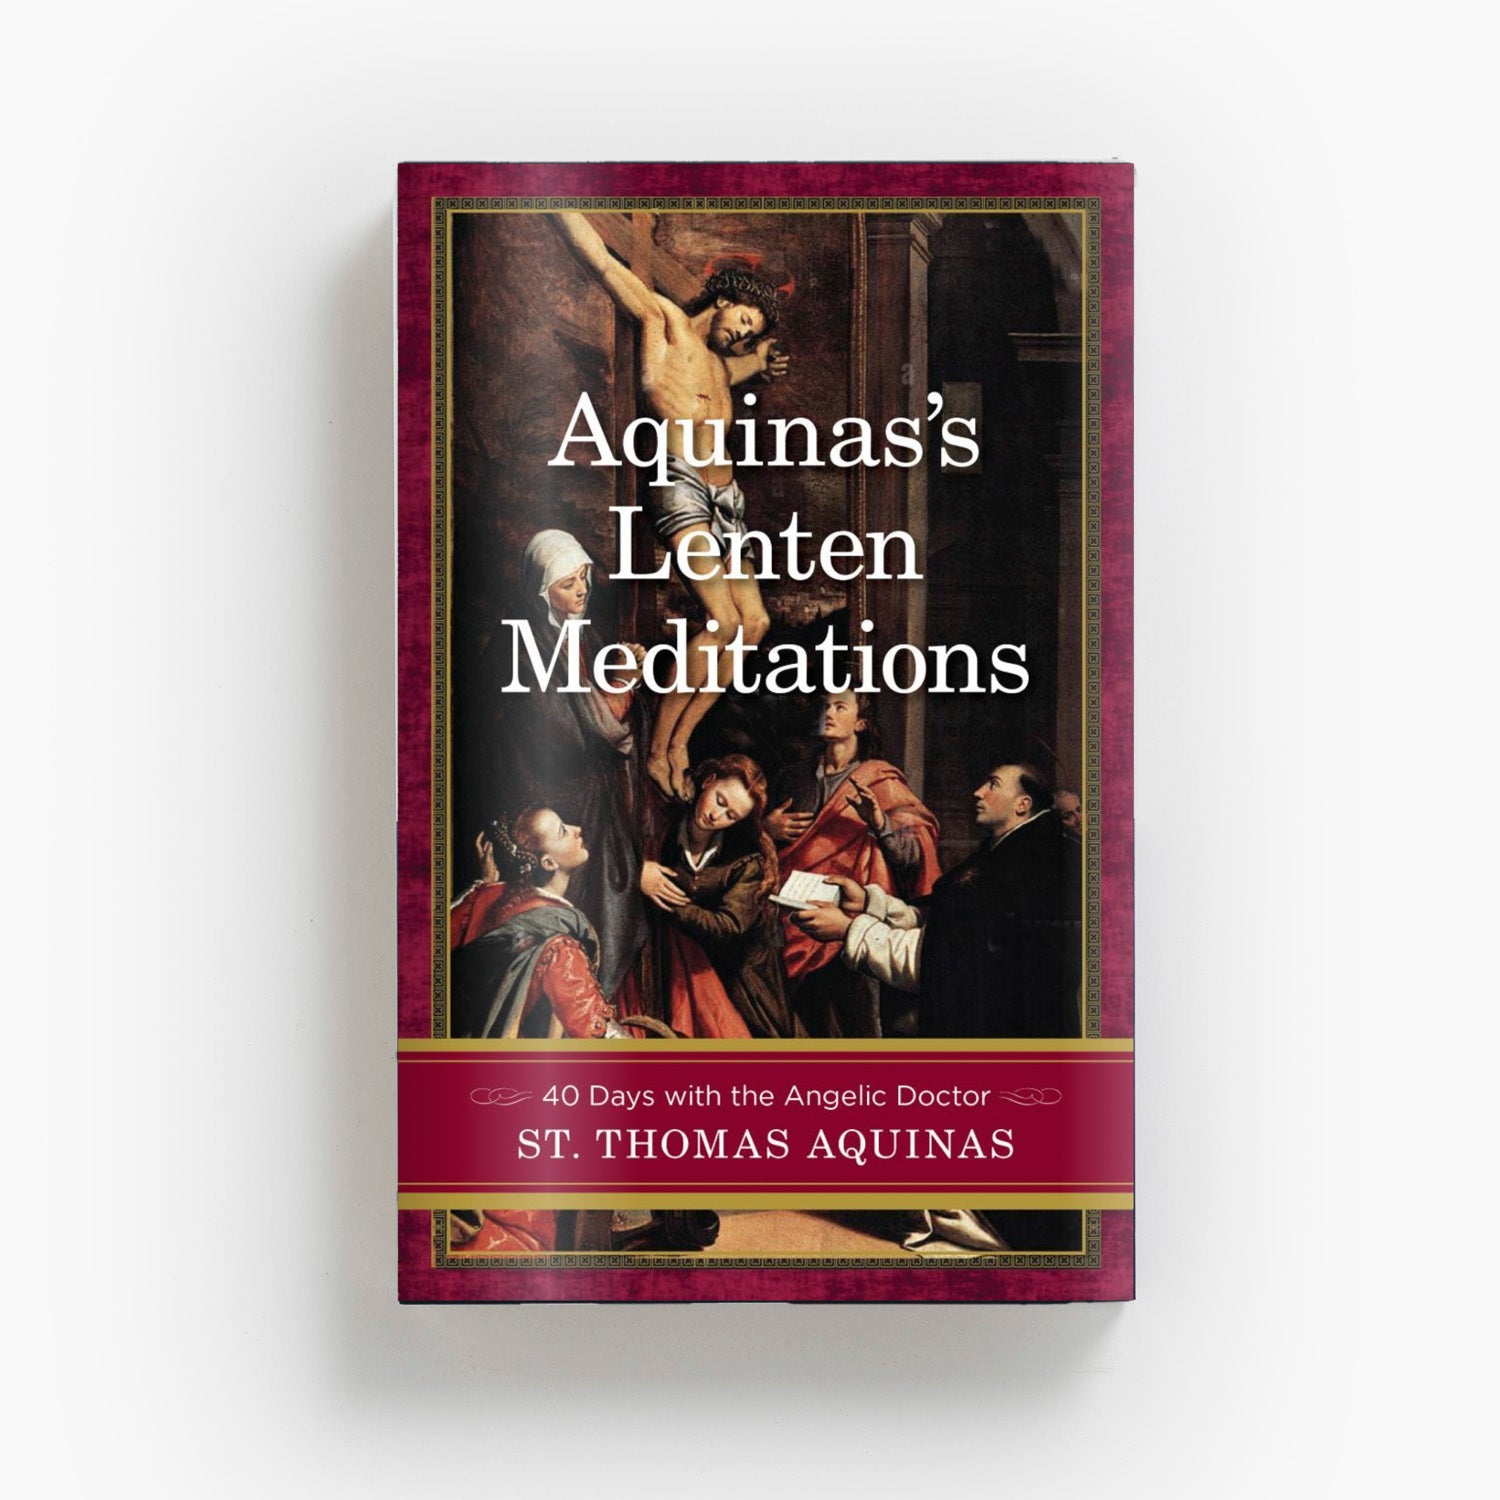 Aquinas’s Lenten Meditations: 40 days with the Angelic Doctor